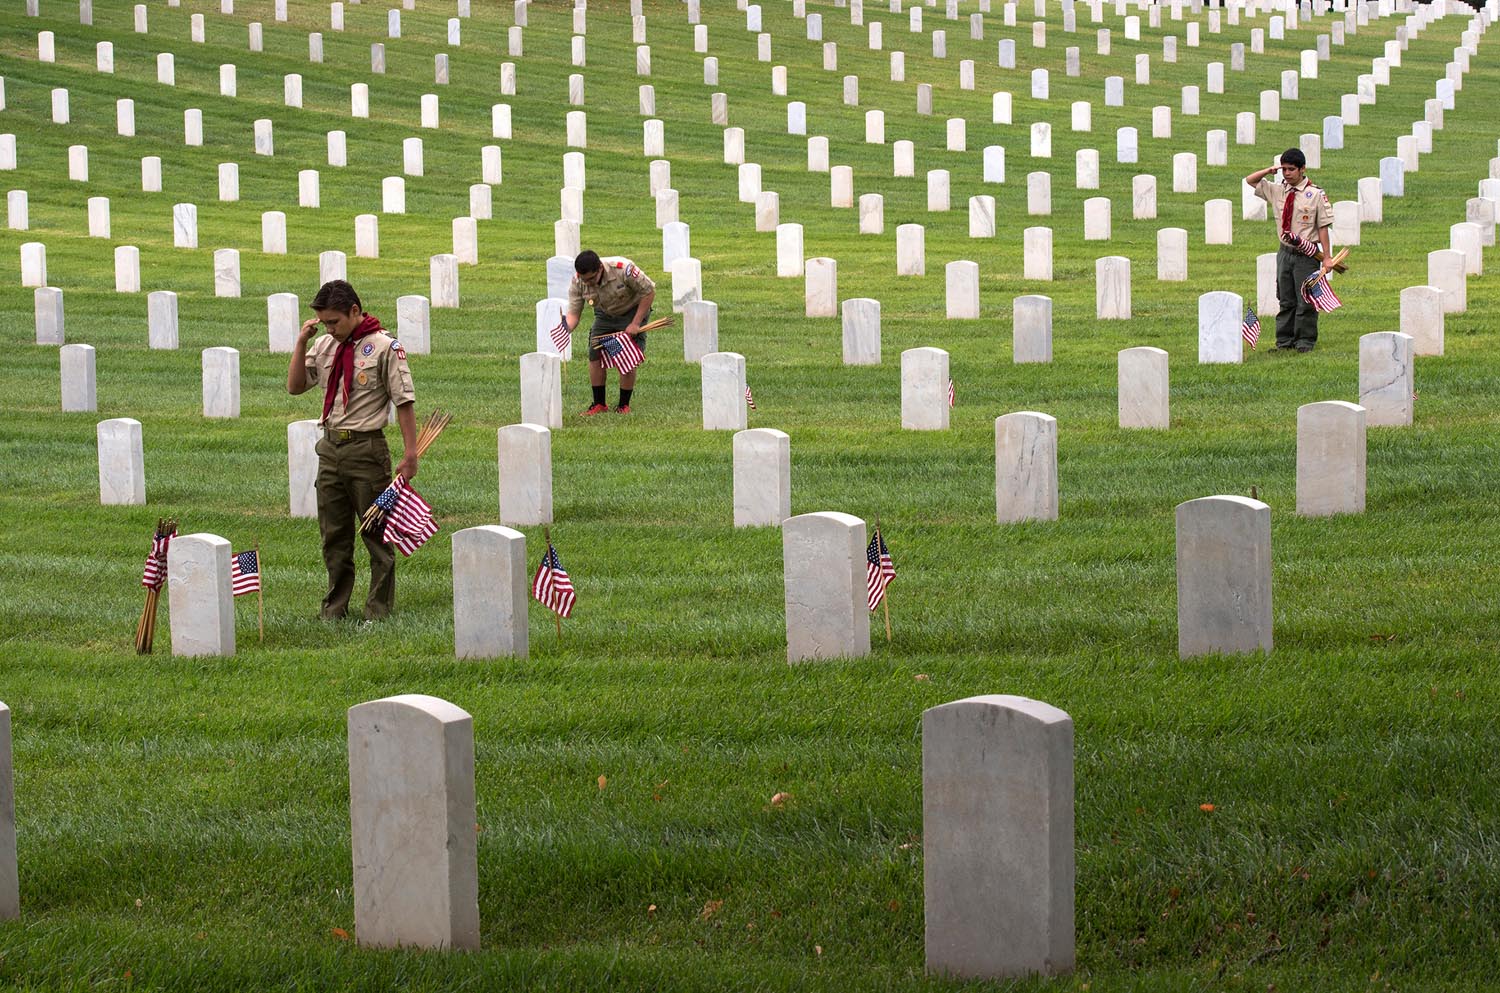  From left, Boy Scouts Troop 400, Dakota Hansen, 14, Christian Pinn, 14, and Kenny Grijalva, 15, place American flags, say the names and render salutes at the Los Angeles National Cemetery on Saturday. Hundreds of L.A. area Boy Scouts, Girls Scouts, 